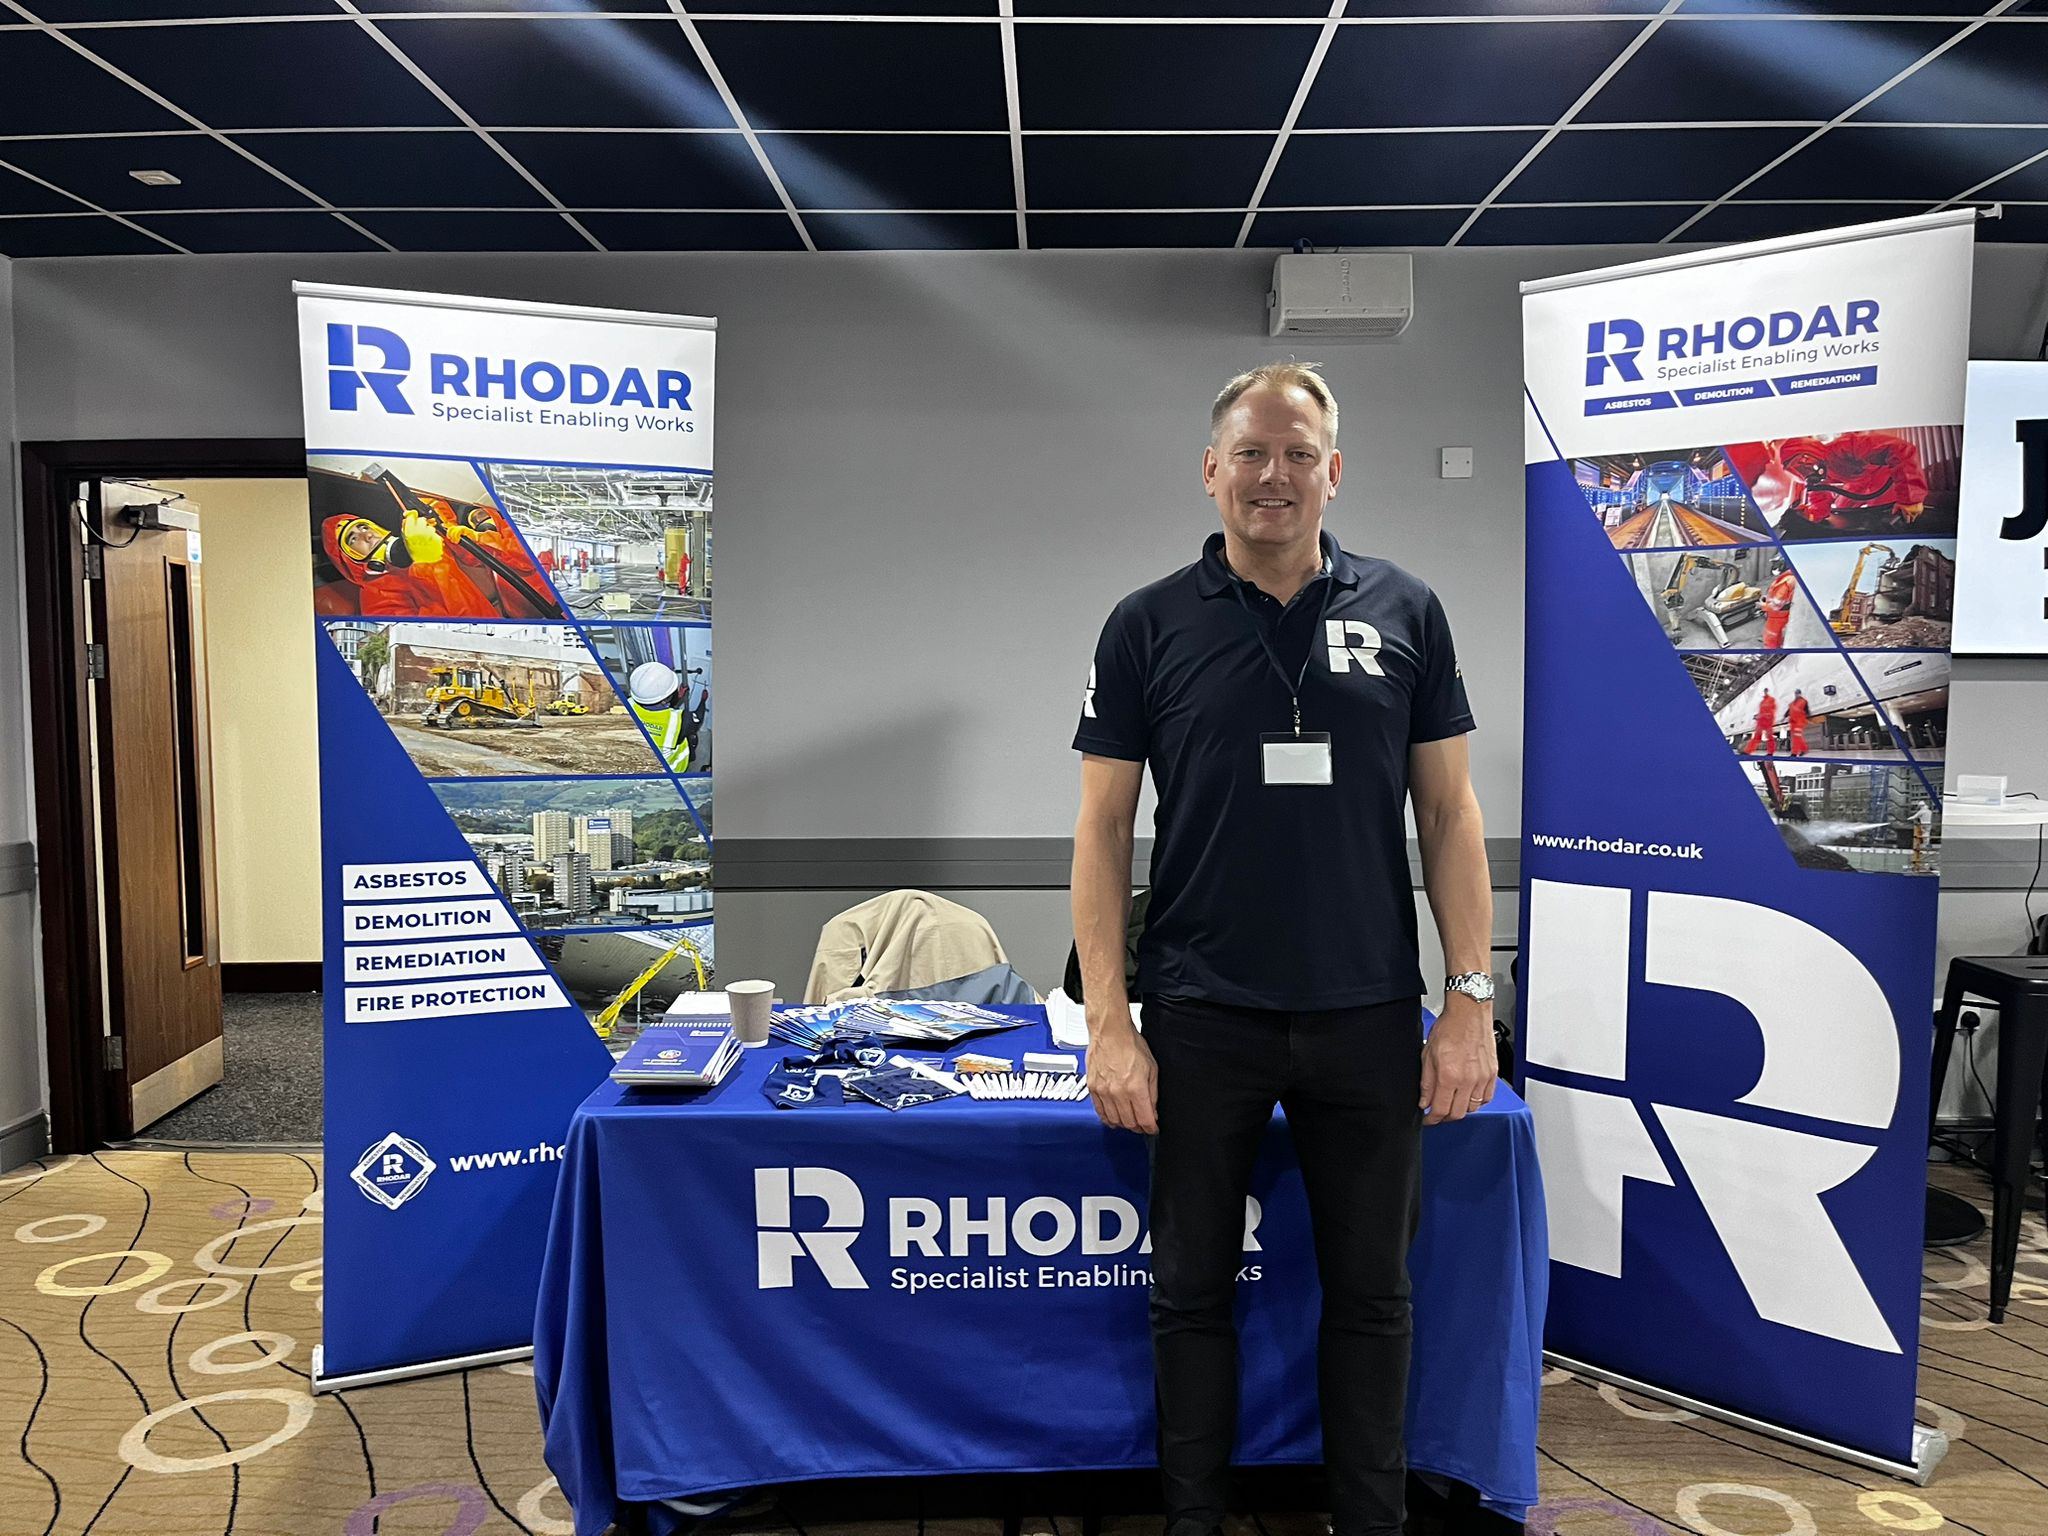 Rhodar at our event in Hull